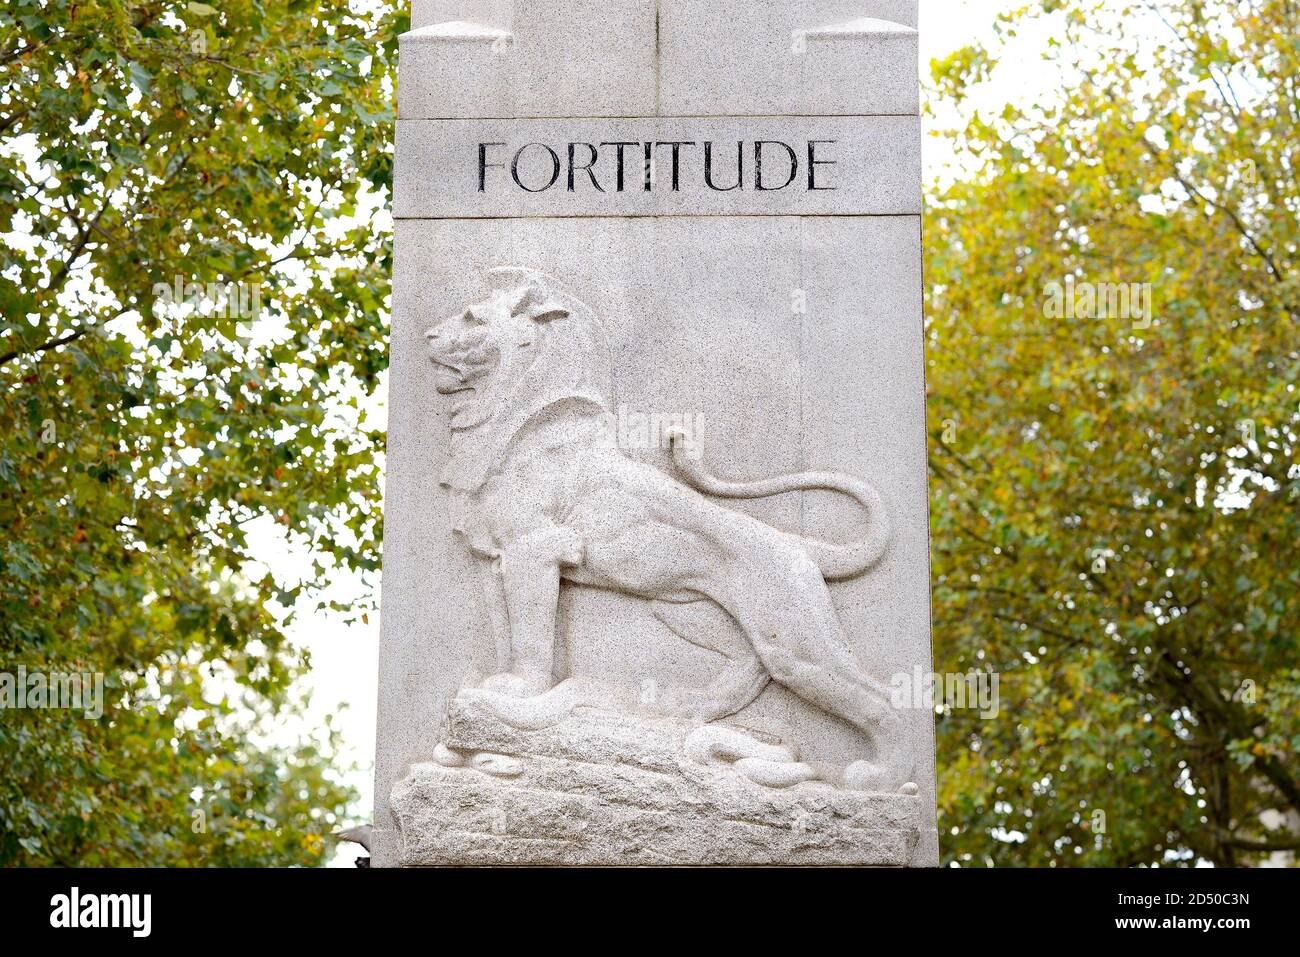 London, England, UK. Monument (George Frampton; 1920) to Edith Cavell (1865-1915; nurse and WW1 heroine) in St Martin's Place. Lion and 'Fortitude' Stock Photo